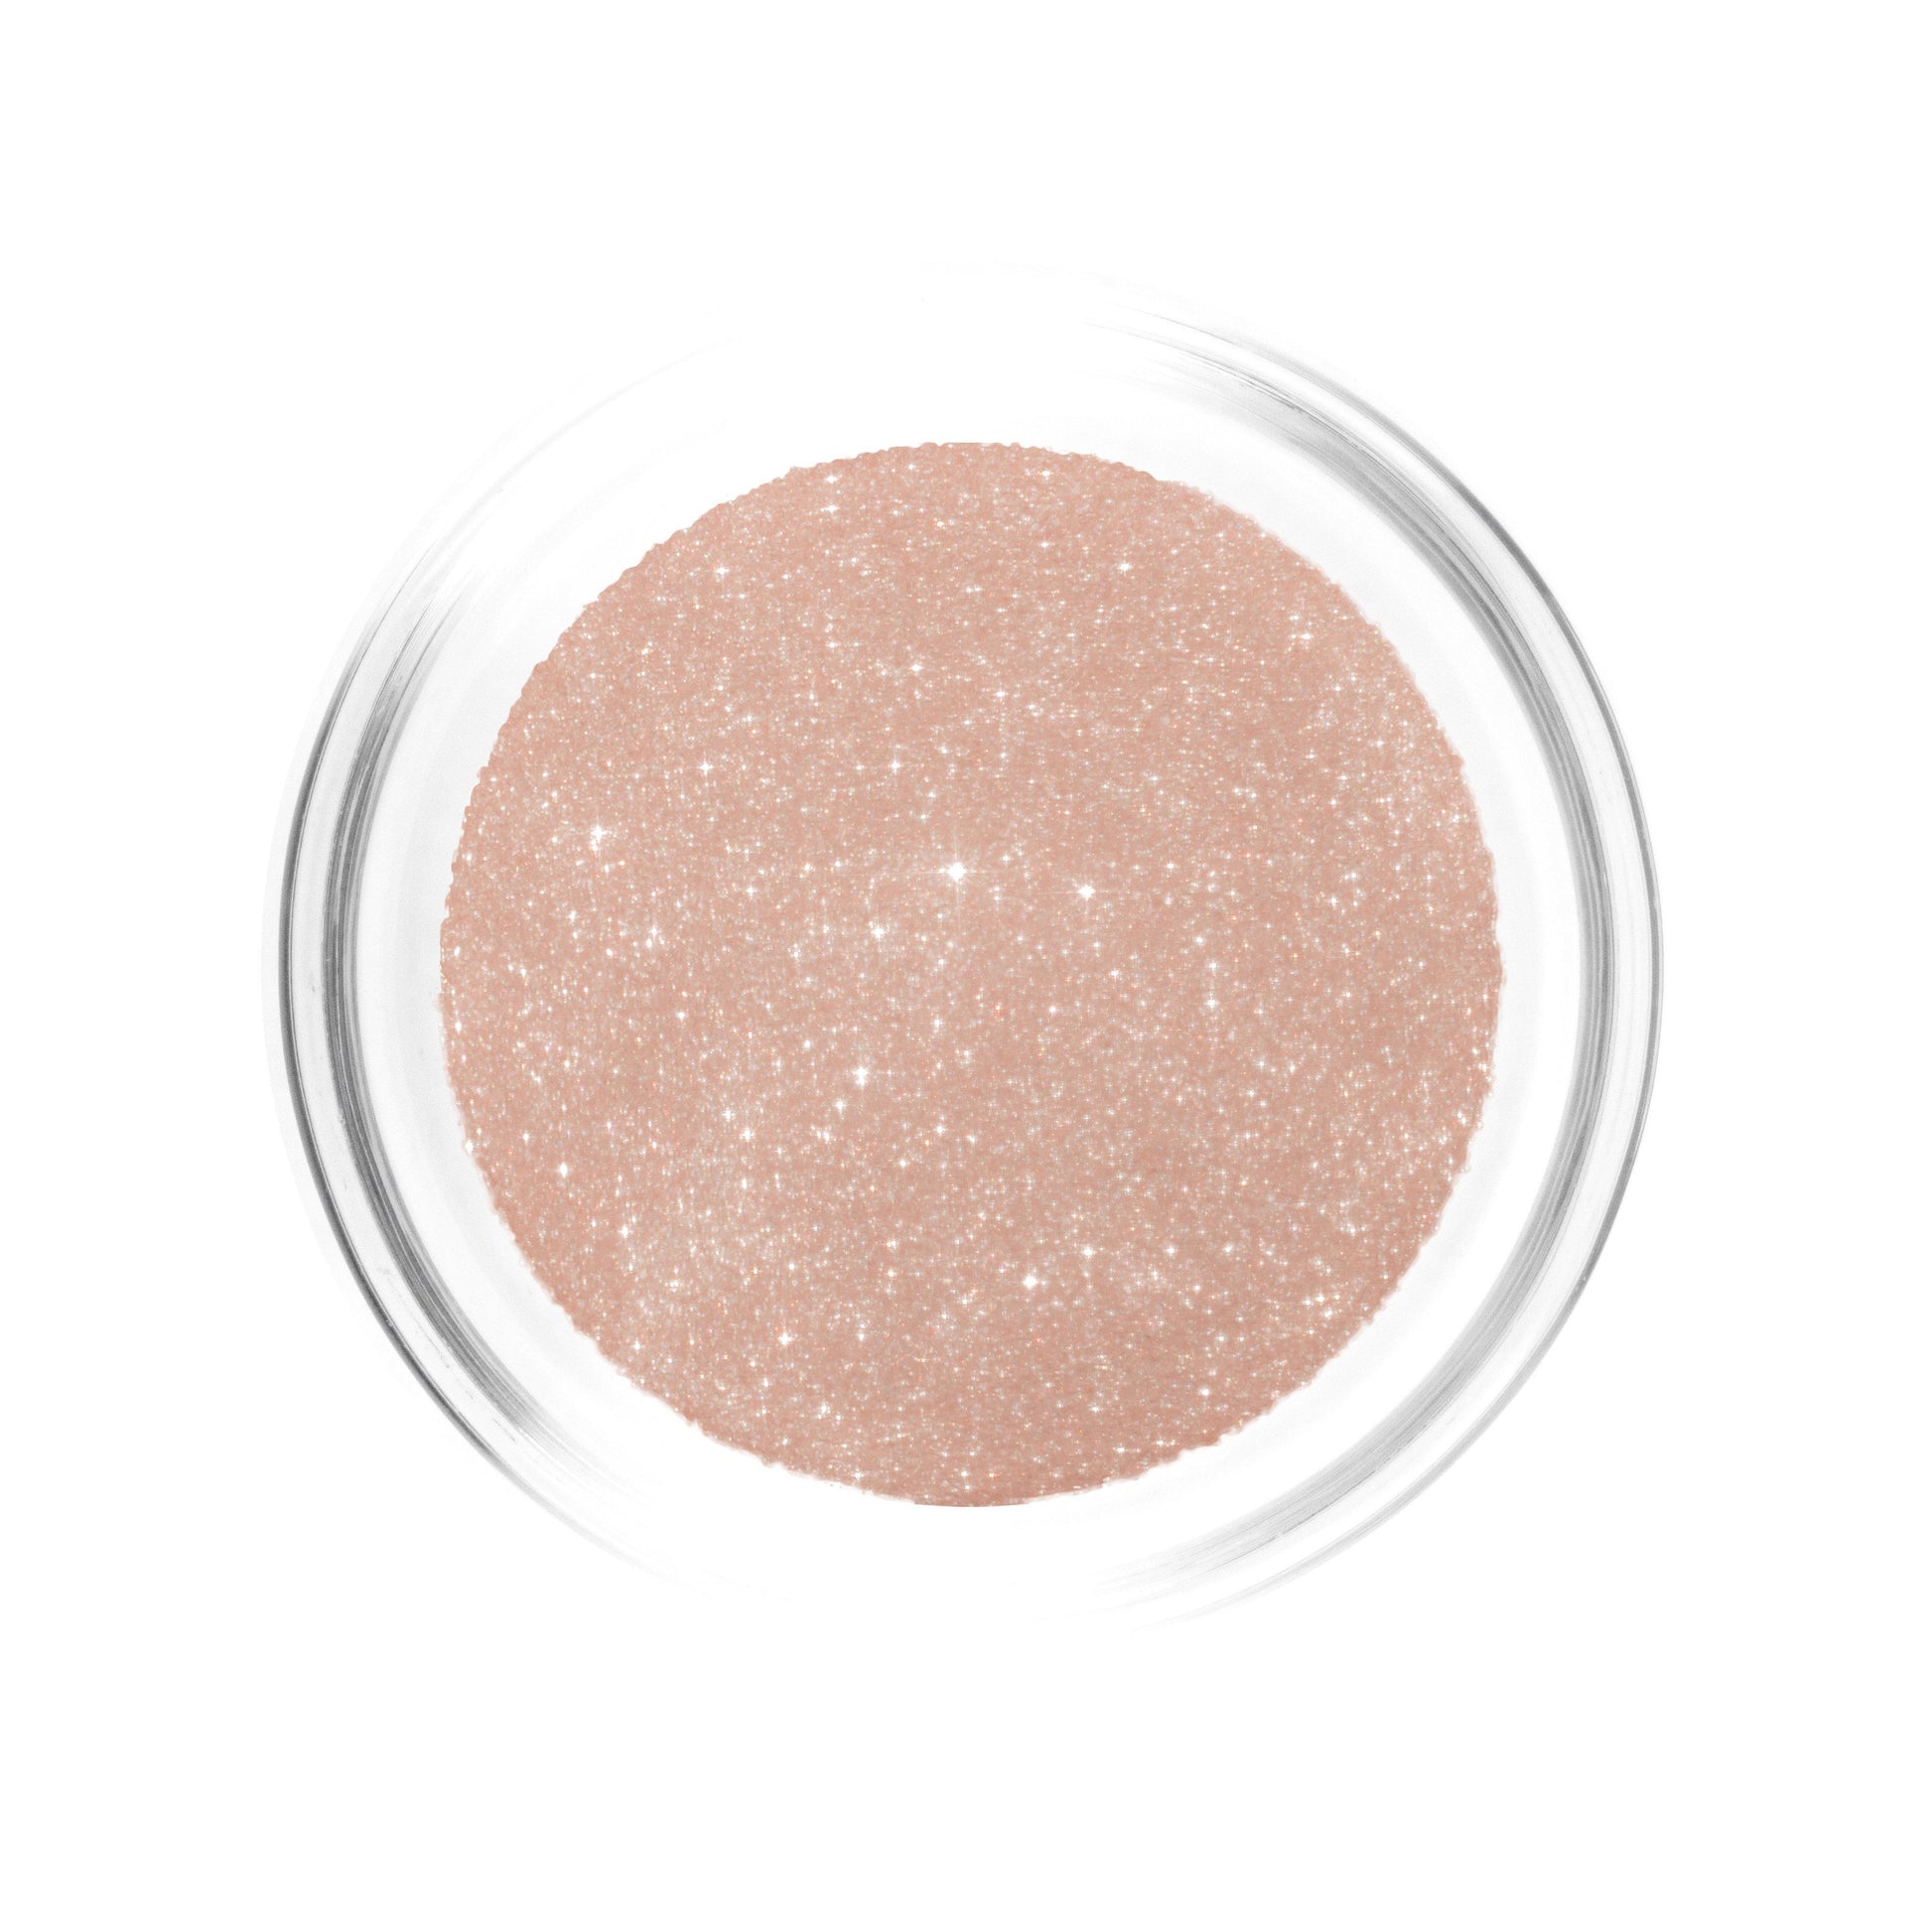 Dewy Body shimmer with pole grip - Normal to dry skin - Dancing Dust